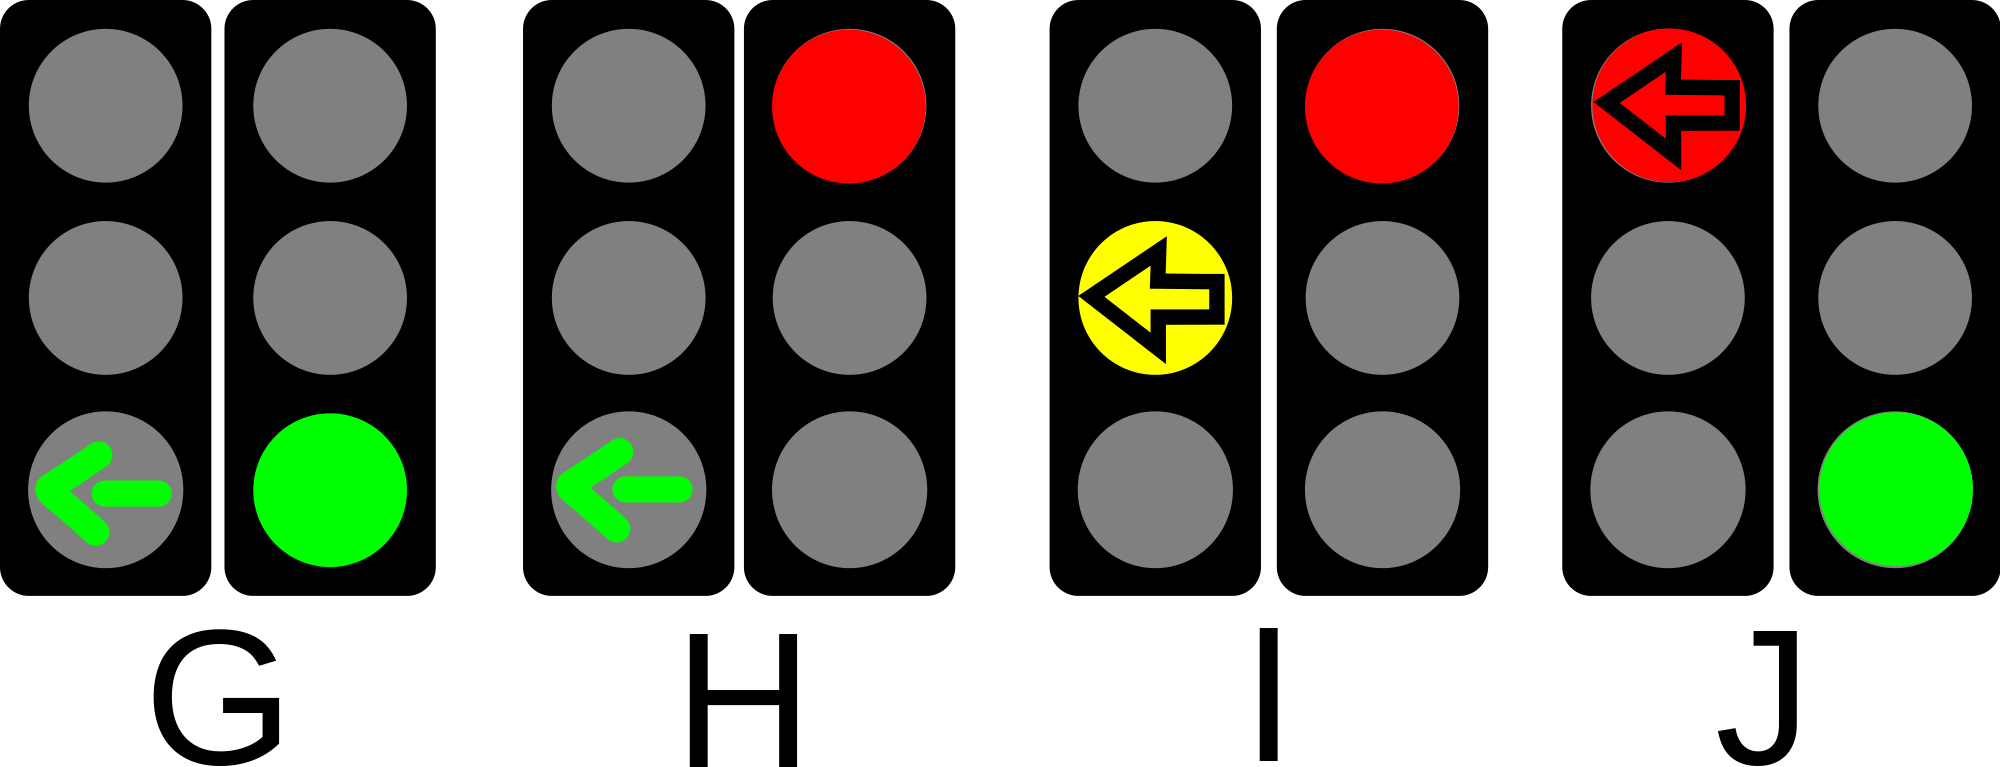 Open - Traffic Lights With Arrows (2000x767)